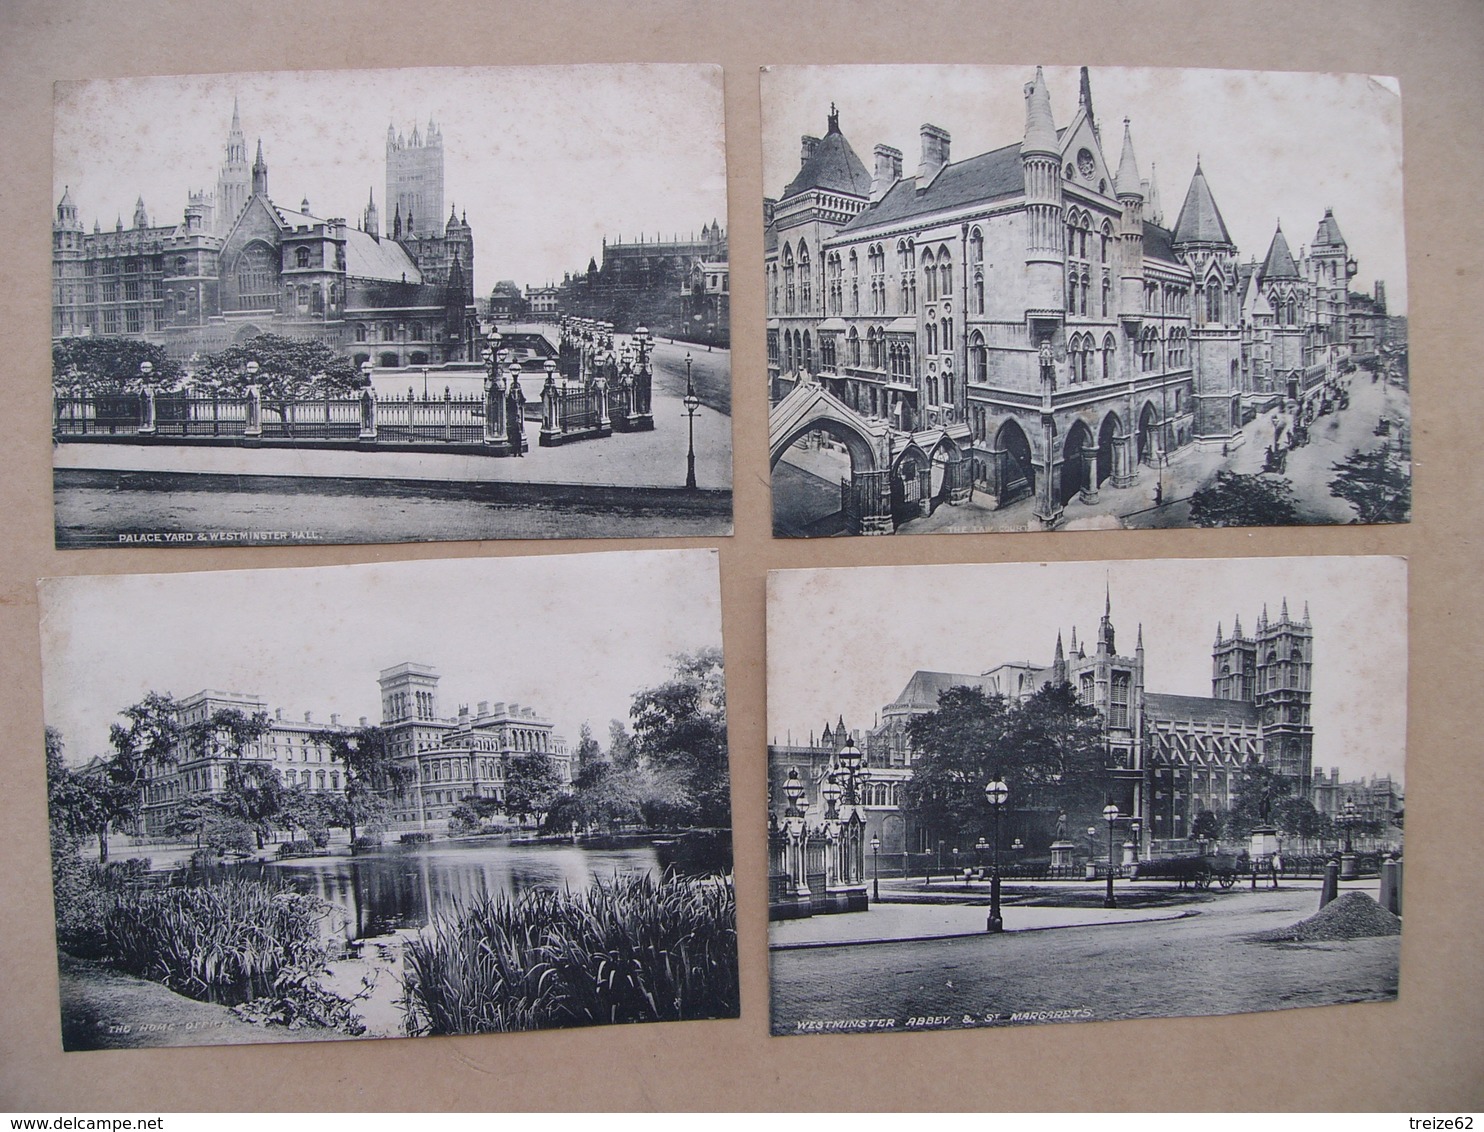 Lot 34 phototypies LONDRES LONDON 1899 gigantic wheel Ludgate Hill the zoo embankment Crystal Palace Piccadilly circus